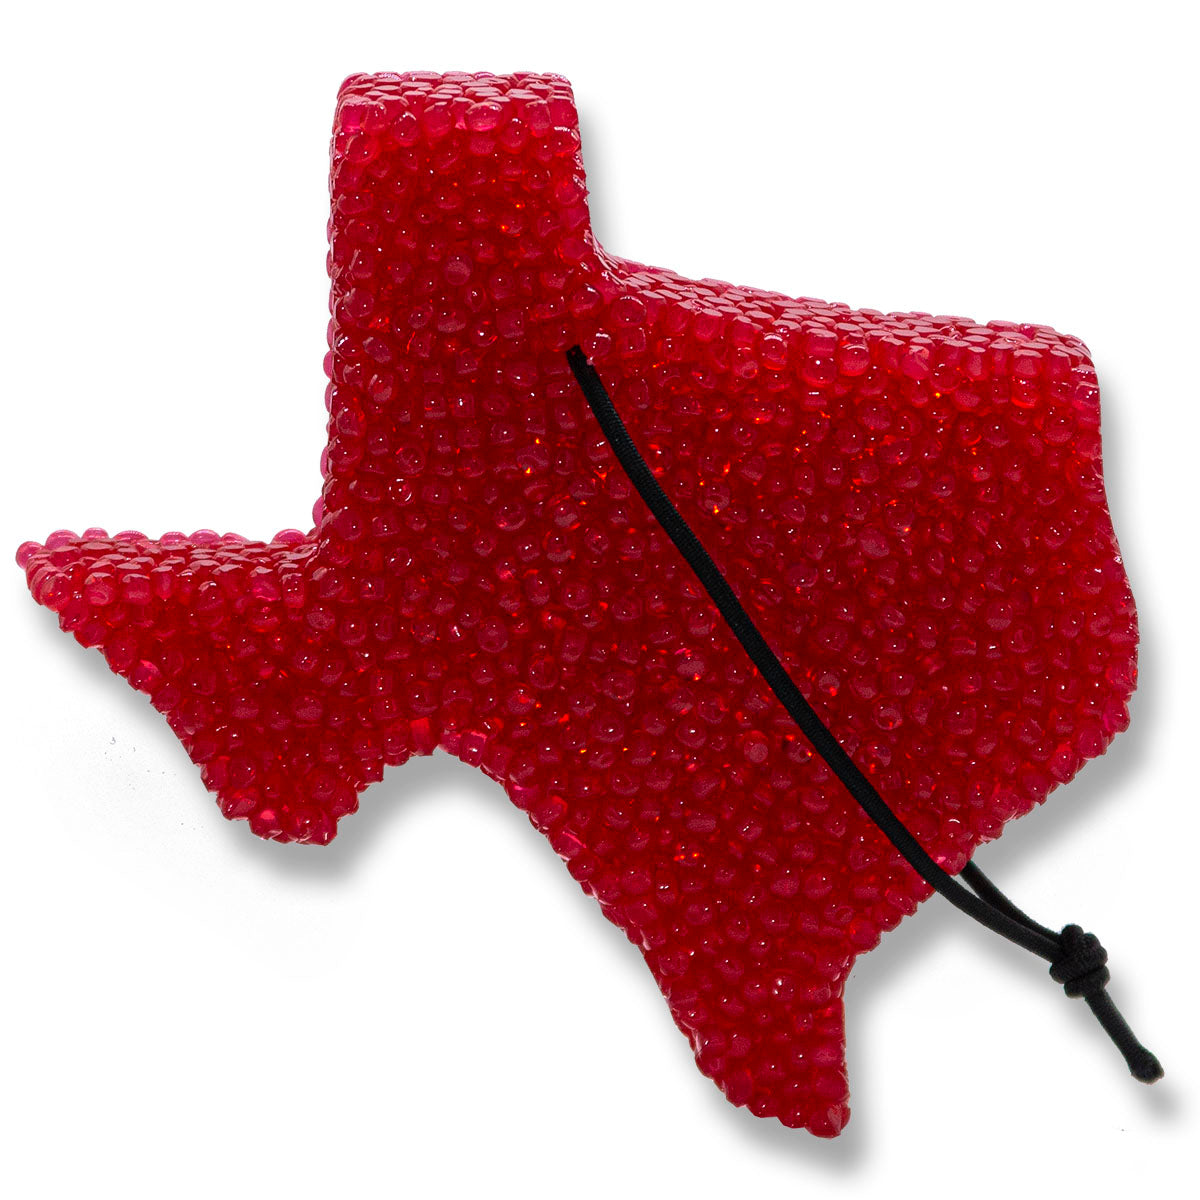 Leather, Lone Star Candles & More’s Premium Strongly Scented Freshies, Authentic Aroma of Genuine Leather, Car & Air Freshener, USA Made in Texas, Red Texas State 1-Pack